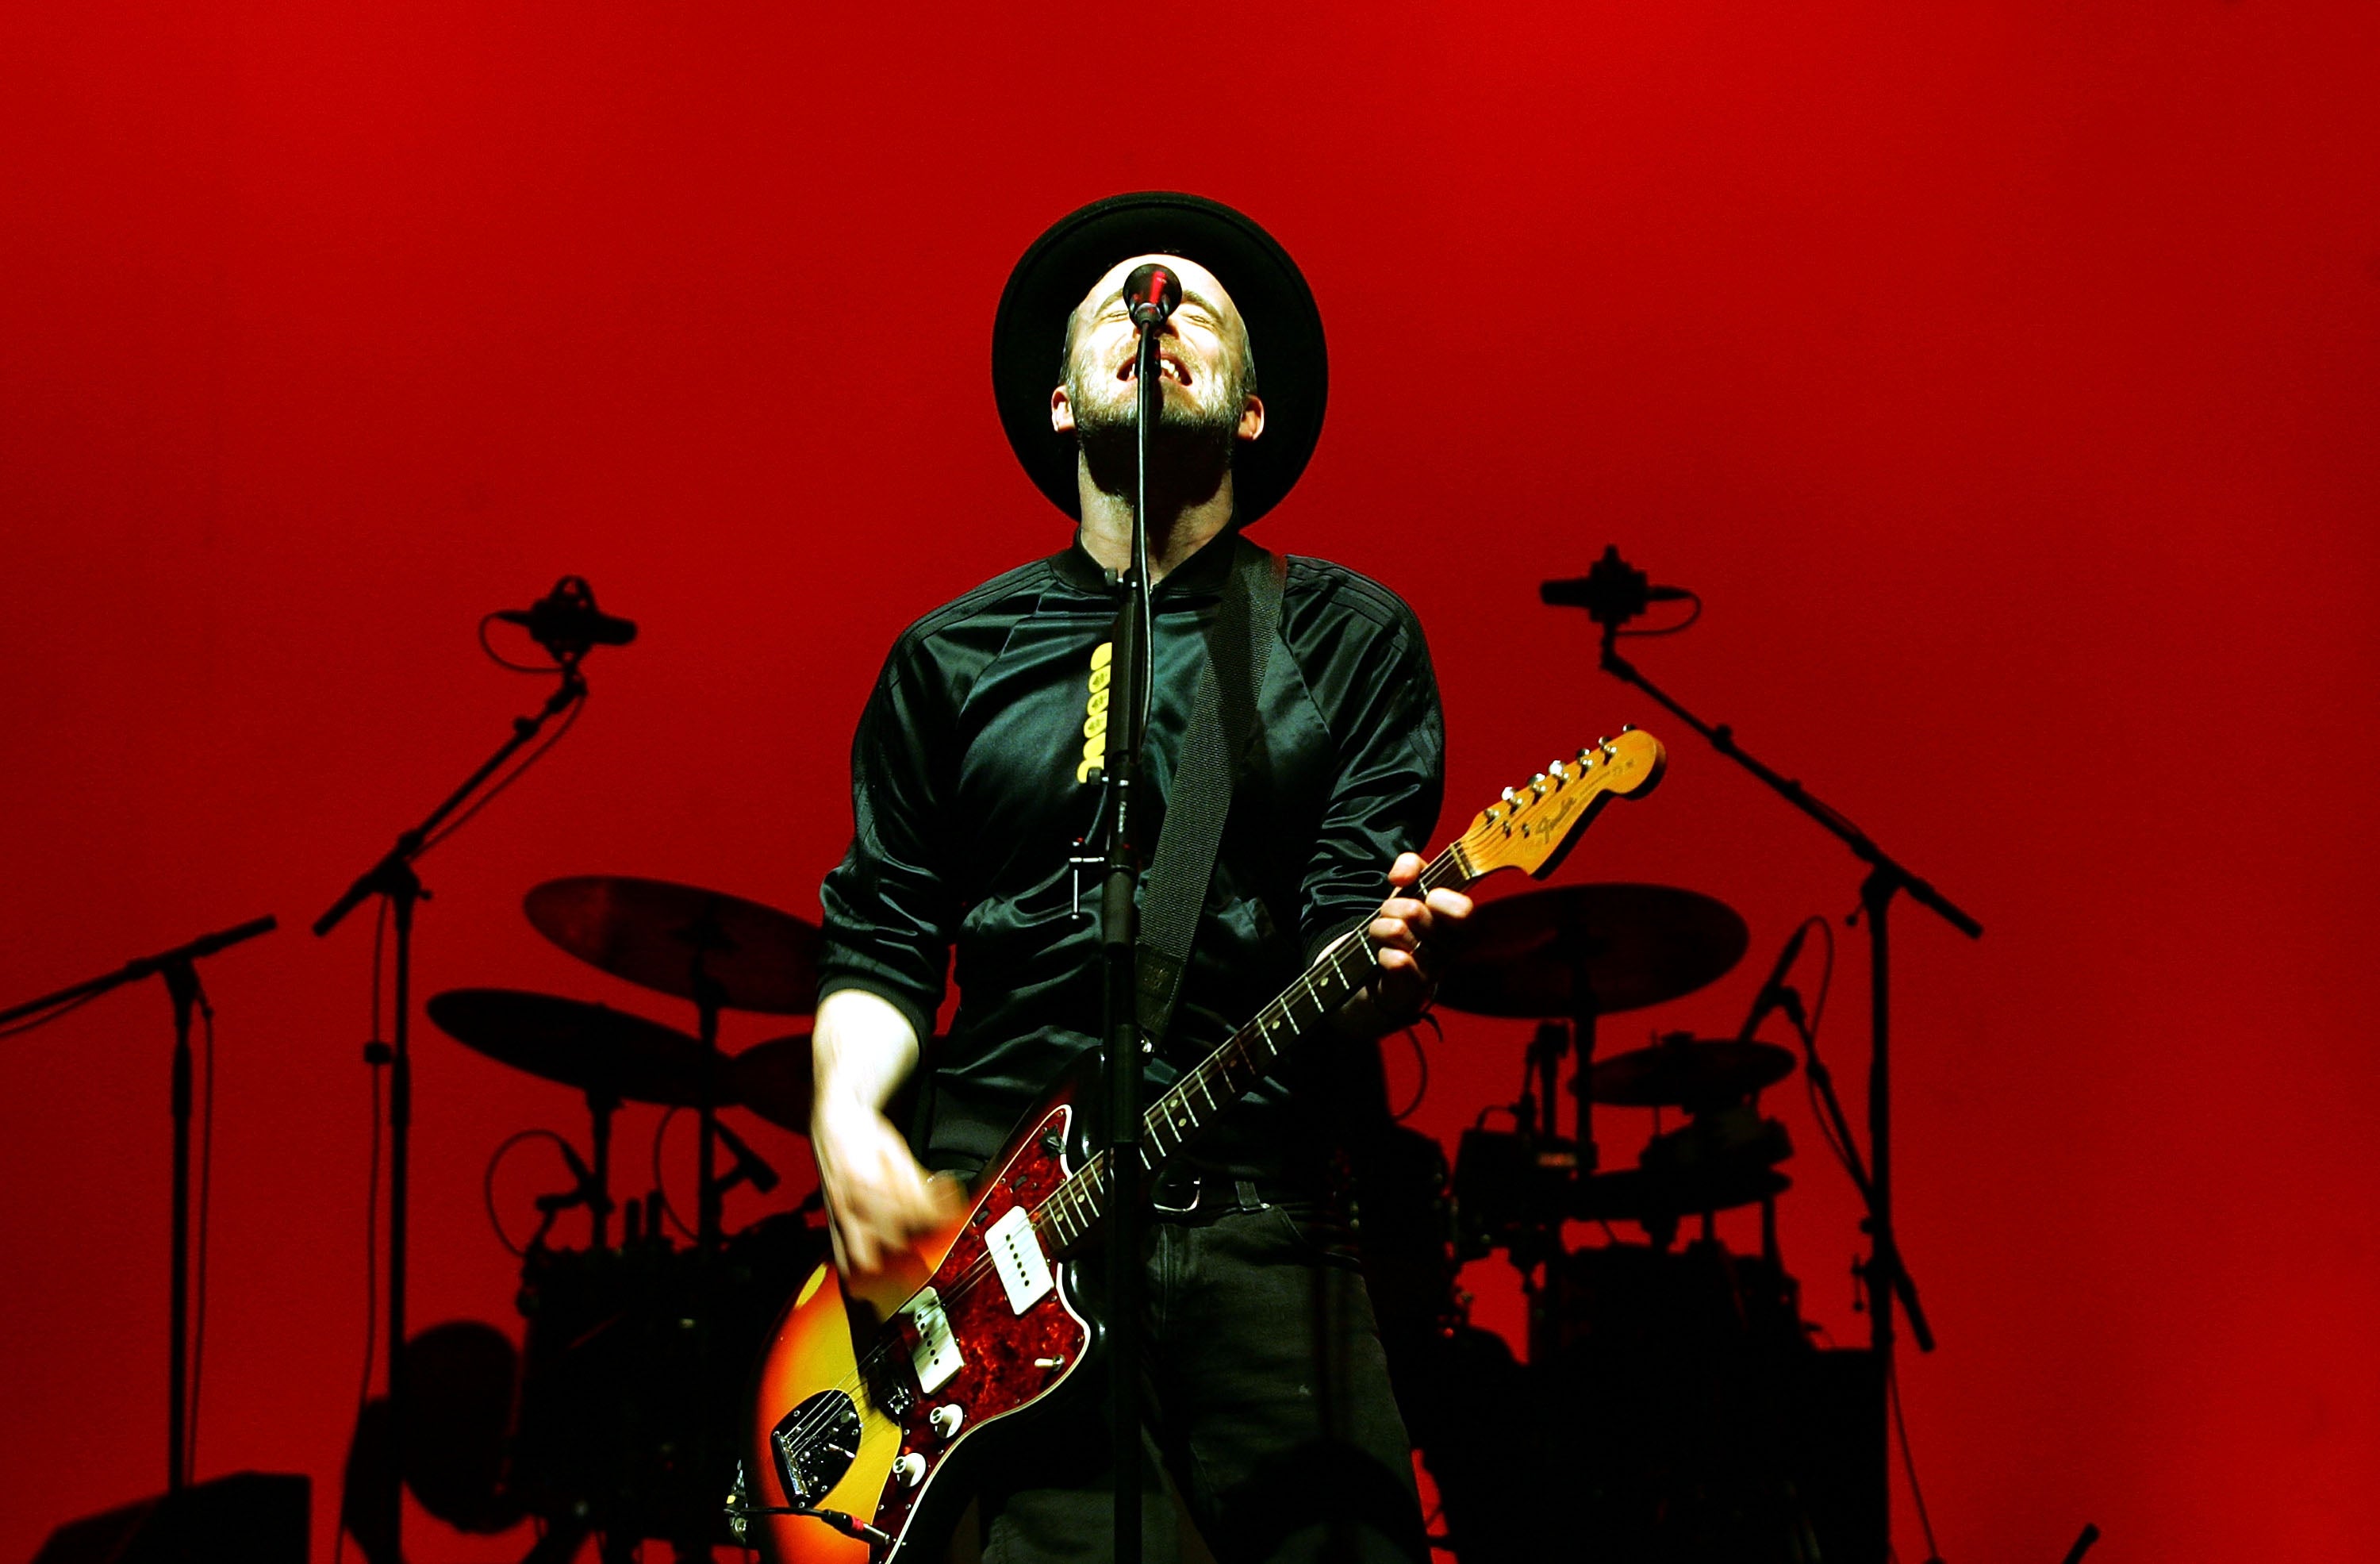 Fran Healy of Travis performing at the Olympic Hall in Seoul, South Korea, 2009